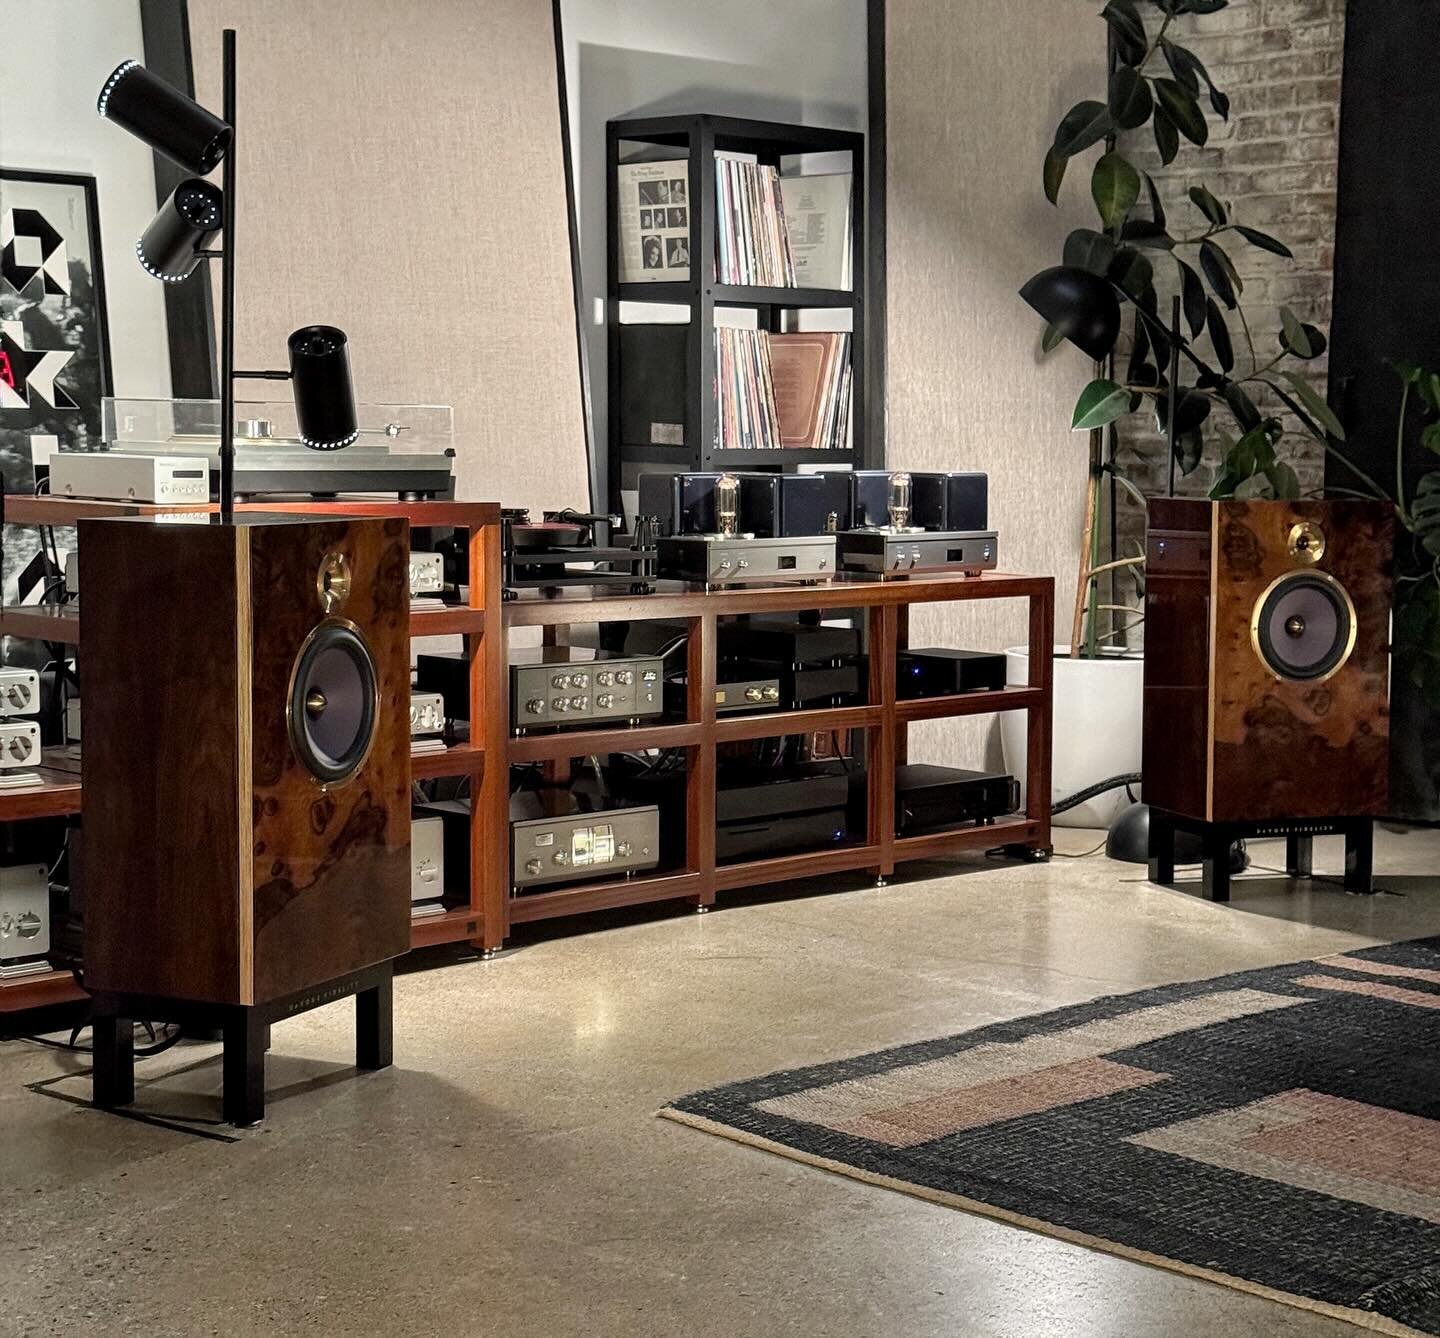 Introducing the O/Bronze - John DeVore&rsquo;s newest model bridges the gap between his most popular speaker, the O/96, and his flagship, the O/Ref - It was first released as a vey limited edition called the Twenty (pictured above), in honor of his 2